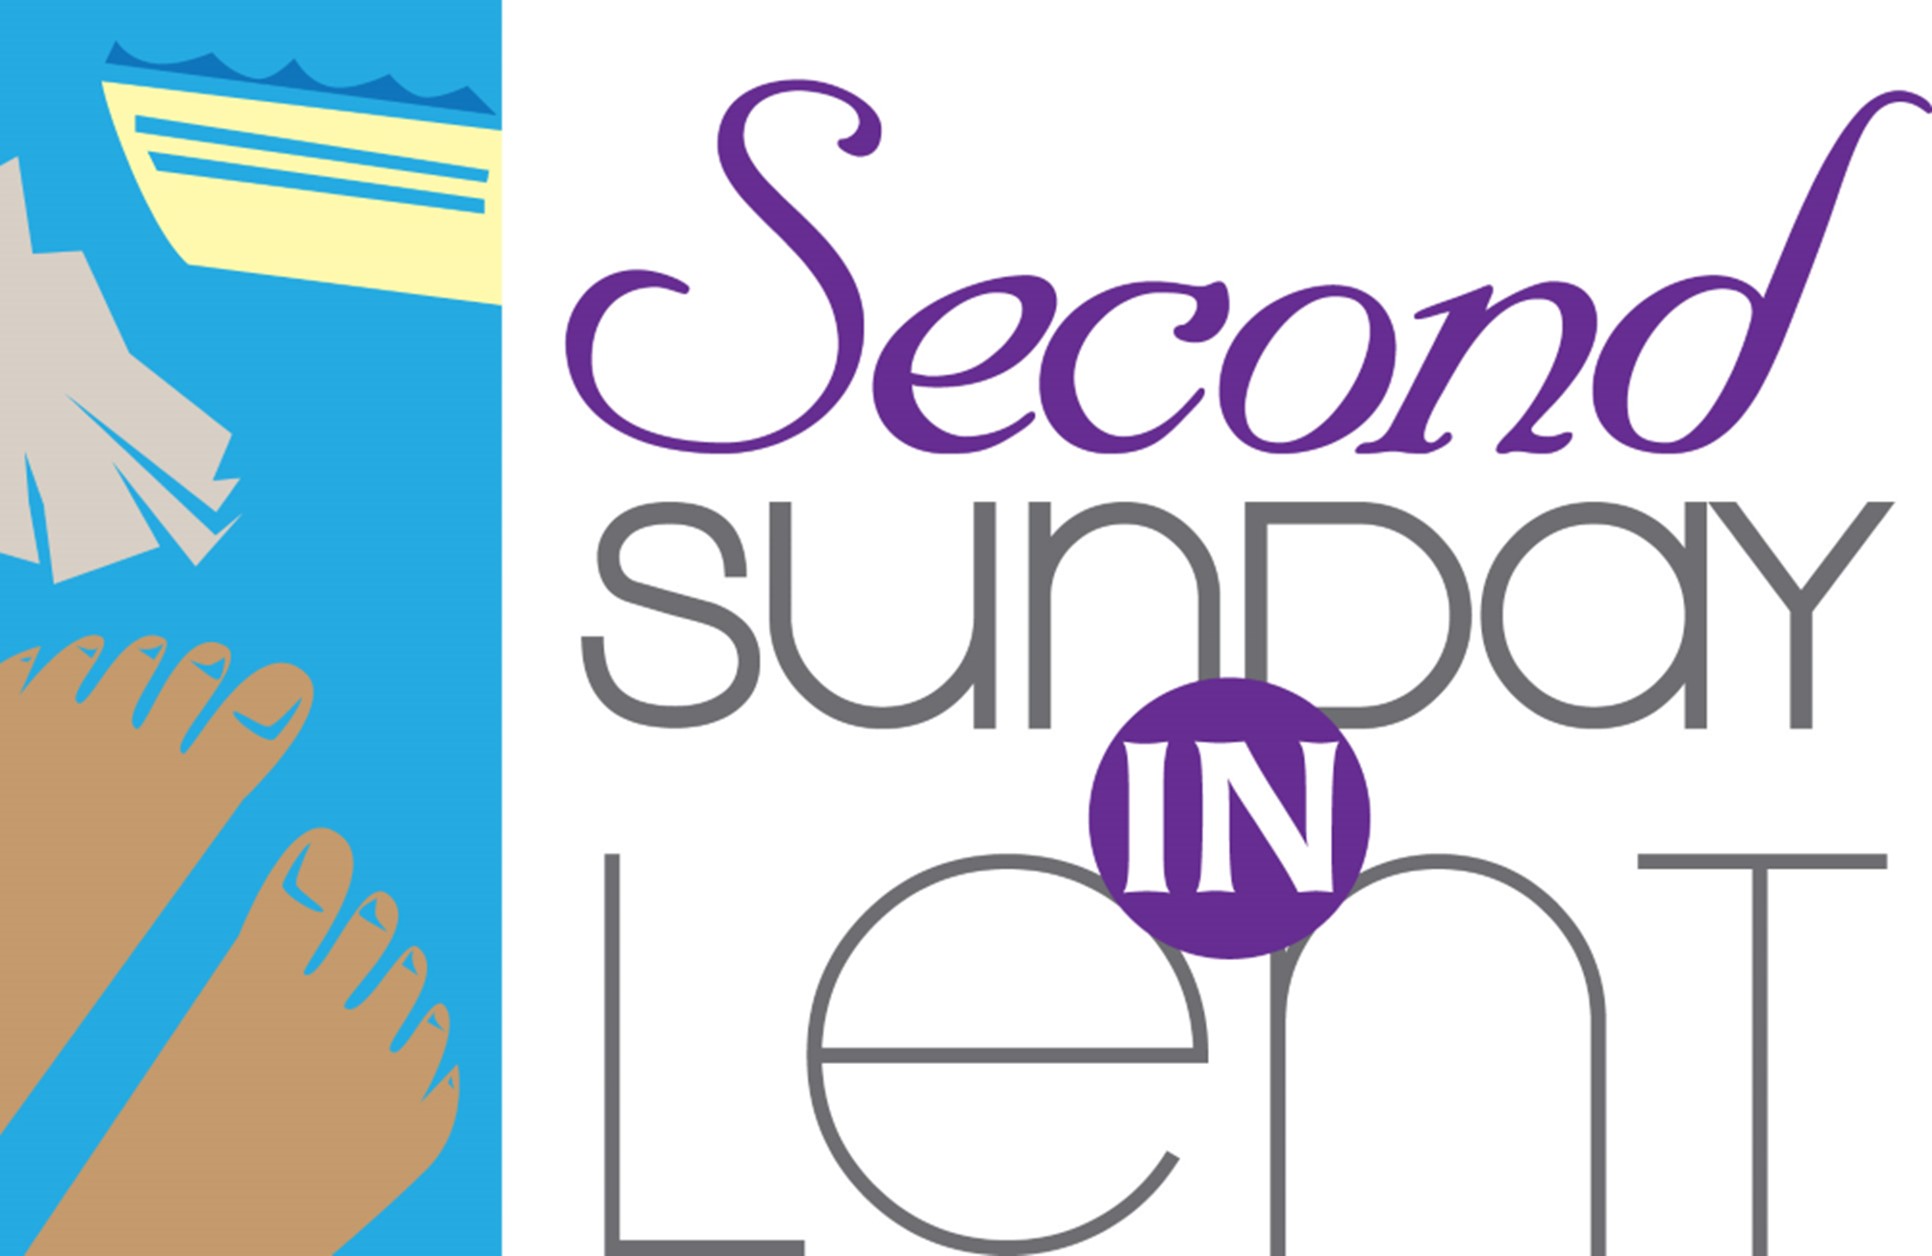 MESSAGE Second Sunday in Lent C 13 March 2022 The Anglican